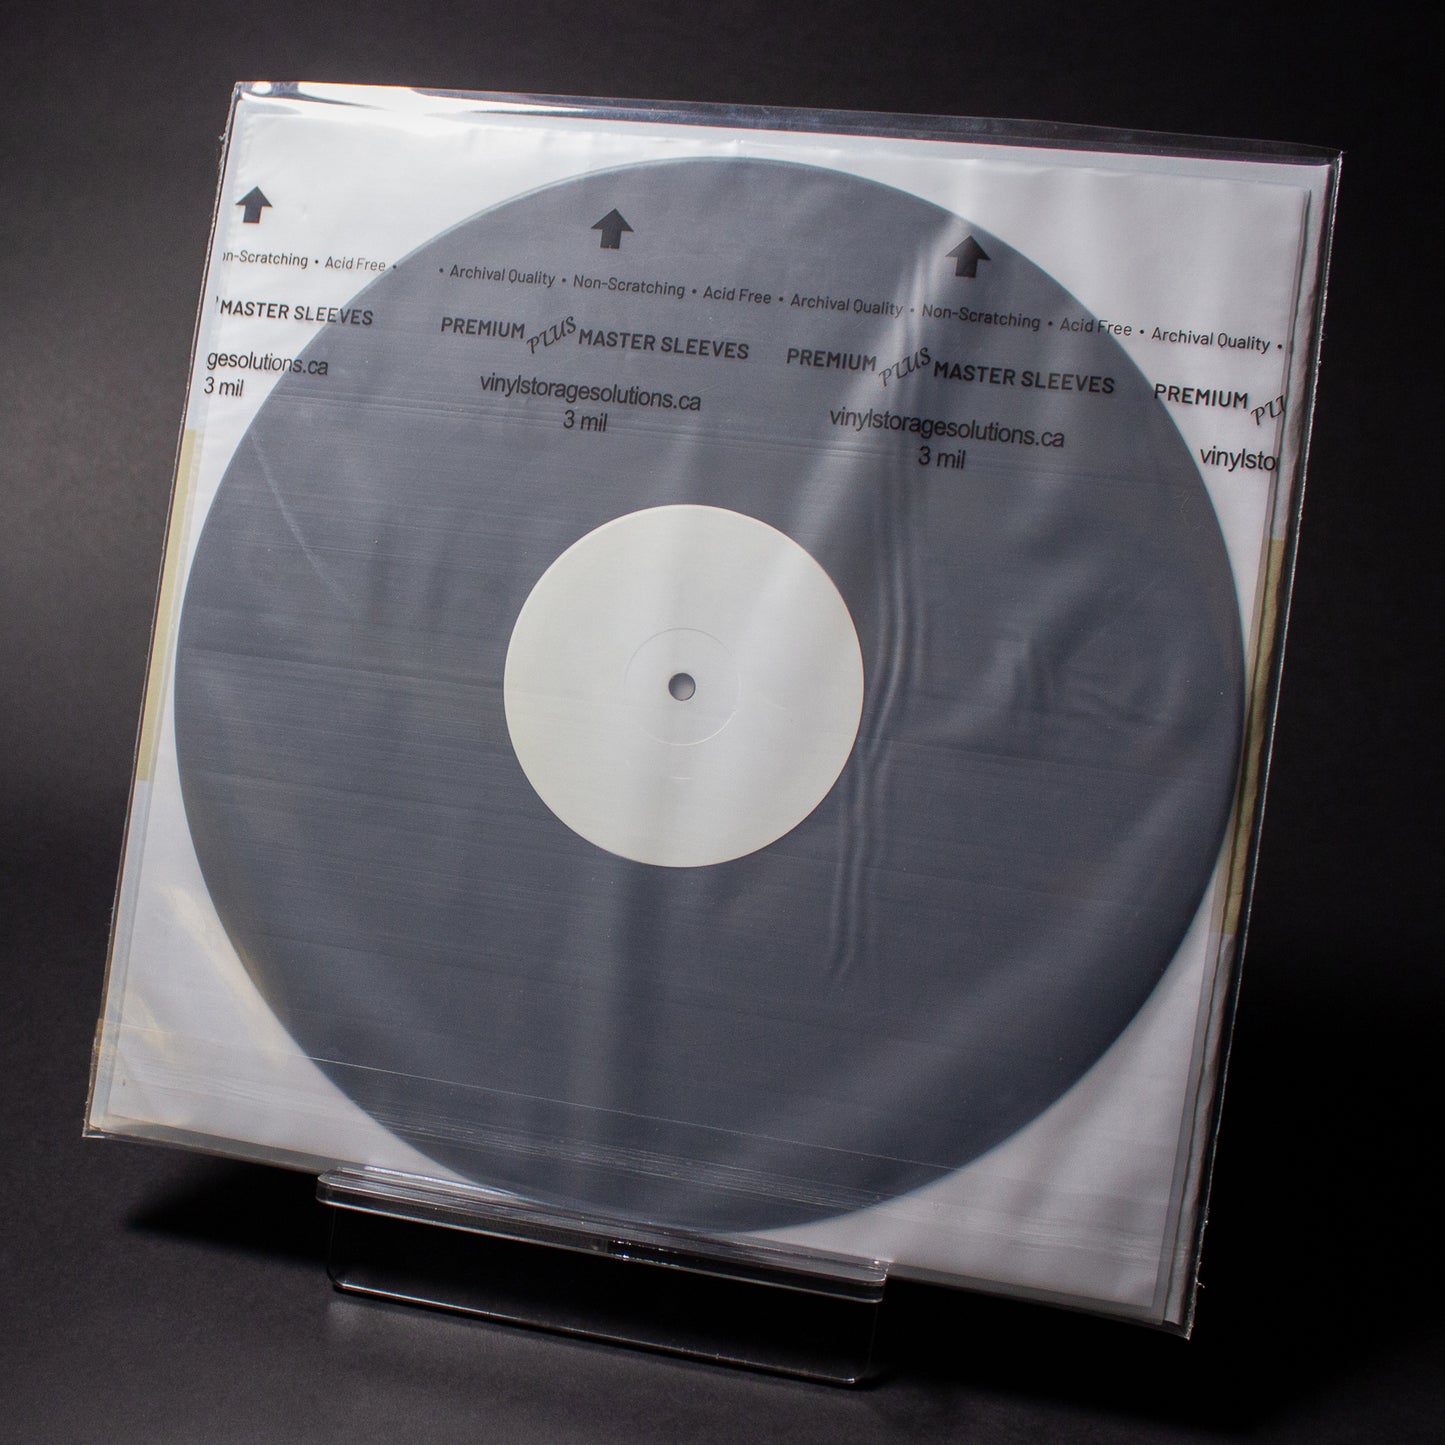 12.75" Dual Pocket Outer Sleeves w/ Sealable Flap (Tape on Flap) - 4mil (25 pack) - Vinyl Storage Solutions